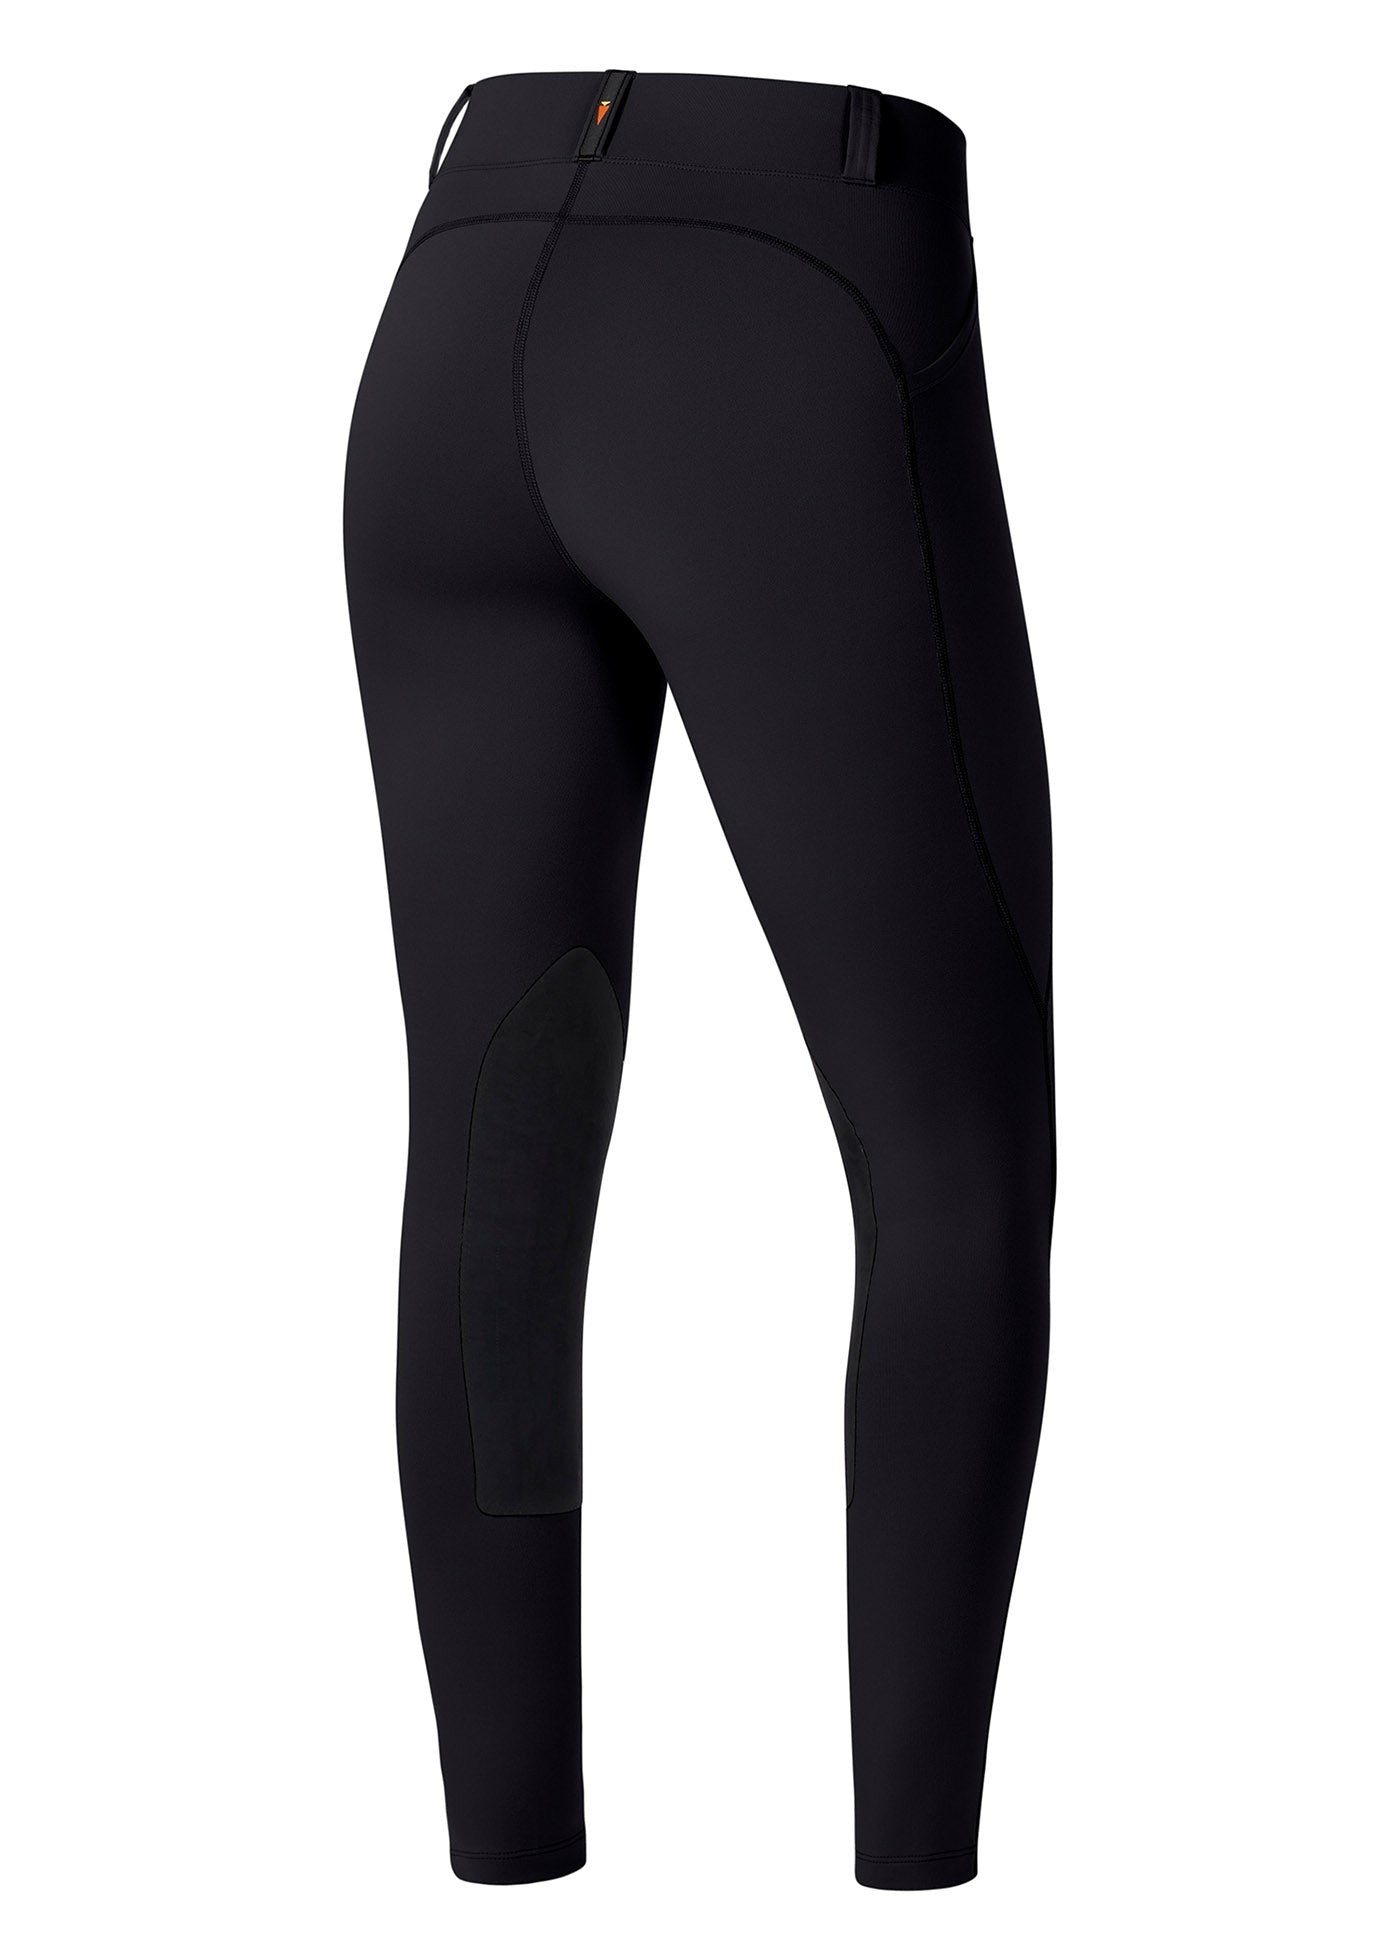 Kerrits Women's Performance Knee Patch Pocket Tights '24